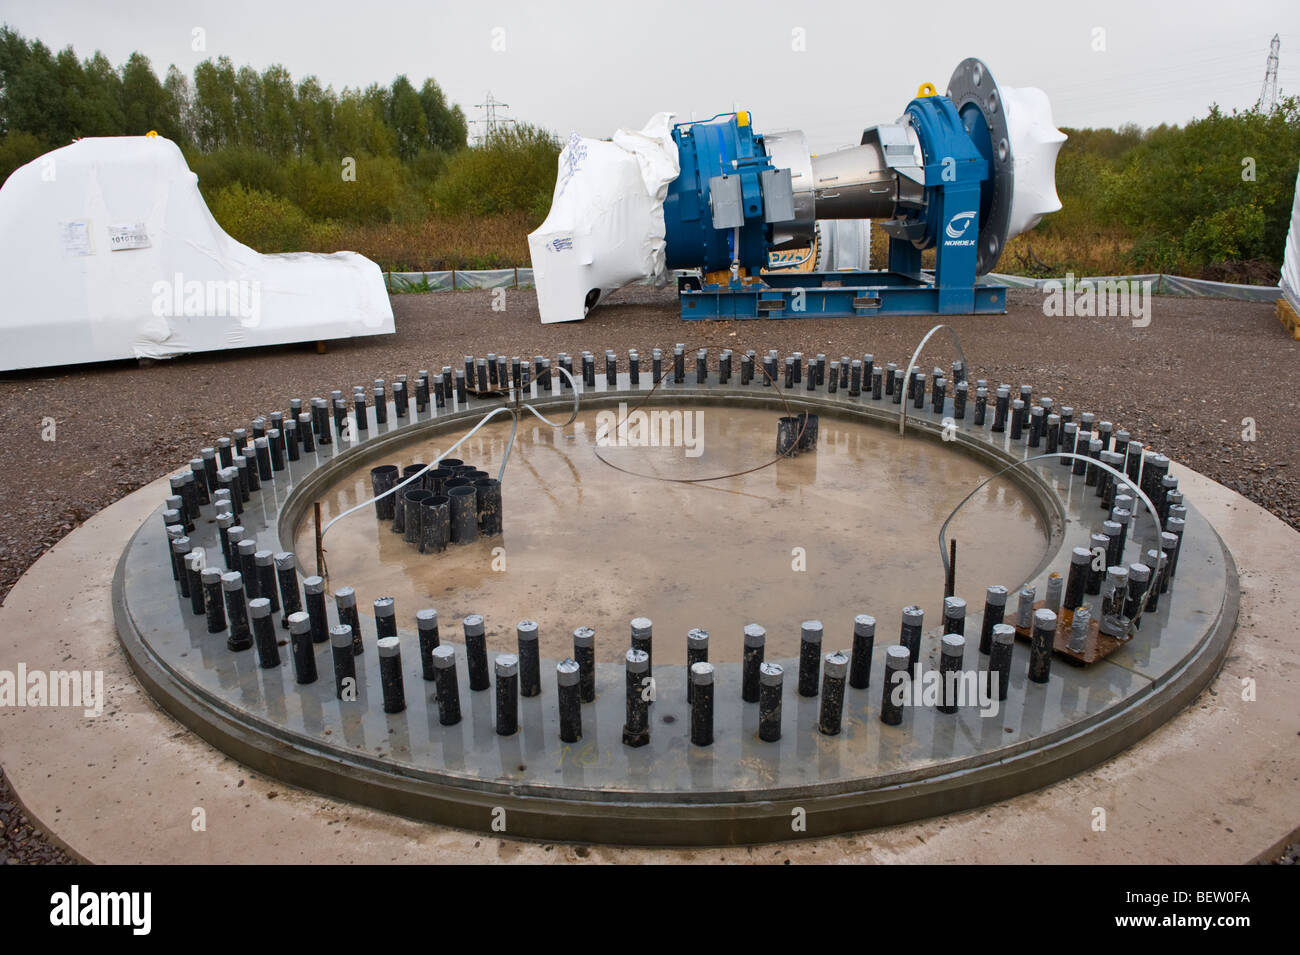 Concrete base with fixings for Nordex N90 wind turbine under construction at Solutia UK Ltd Newport South Wales UK Stock Photo